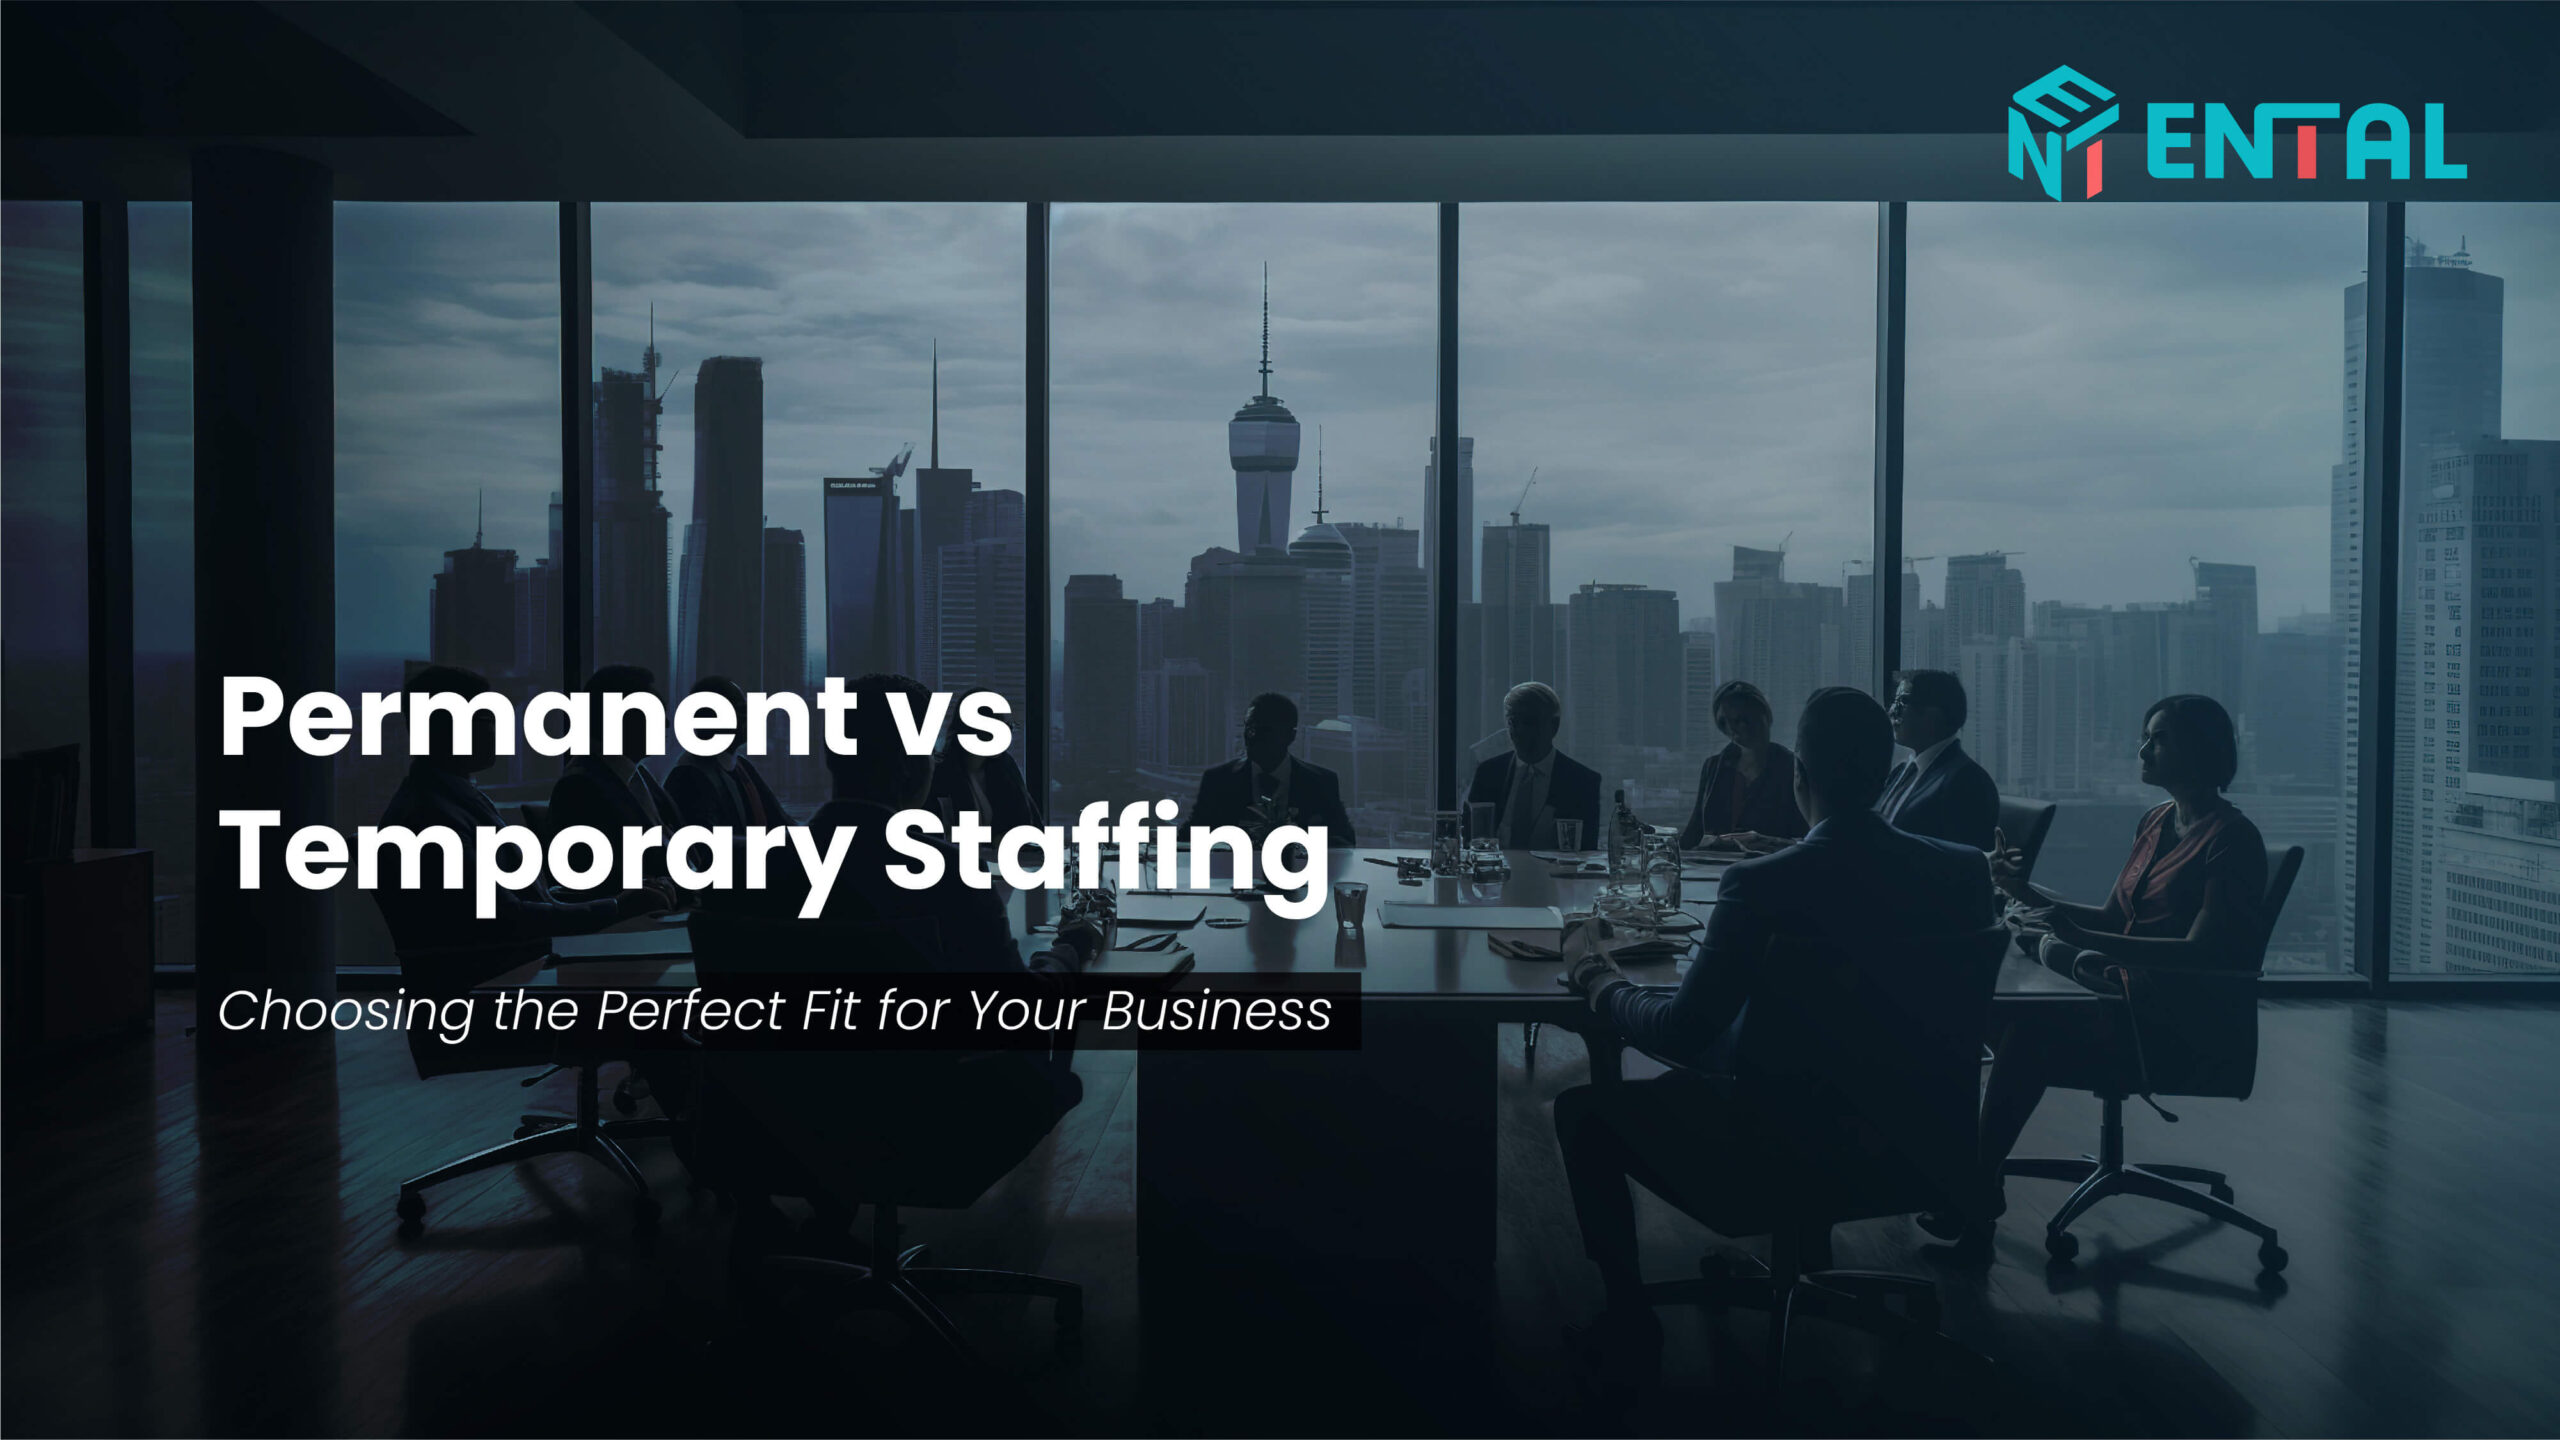 Permanent vs temporary staffing